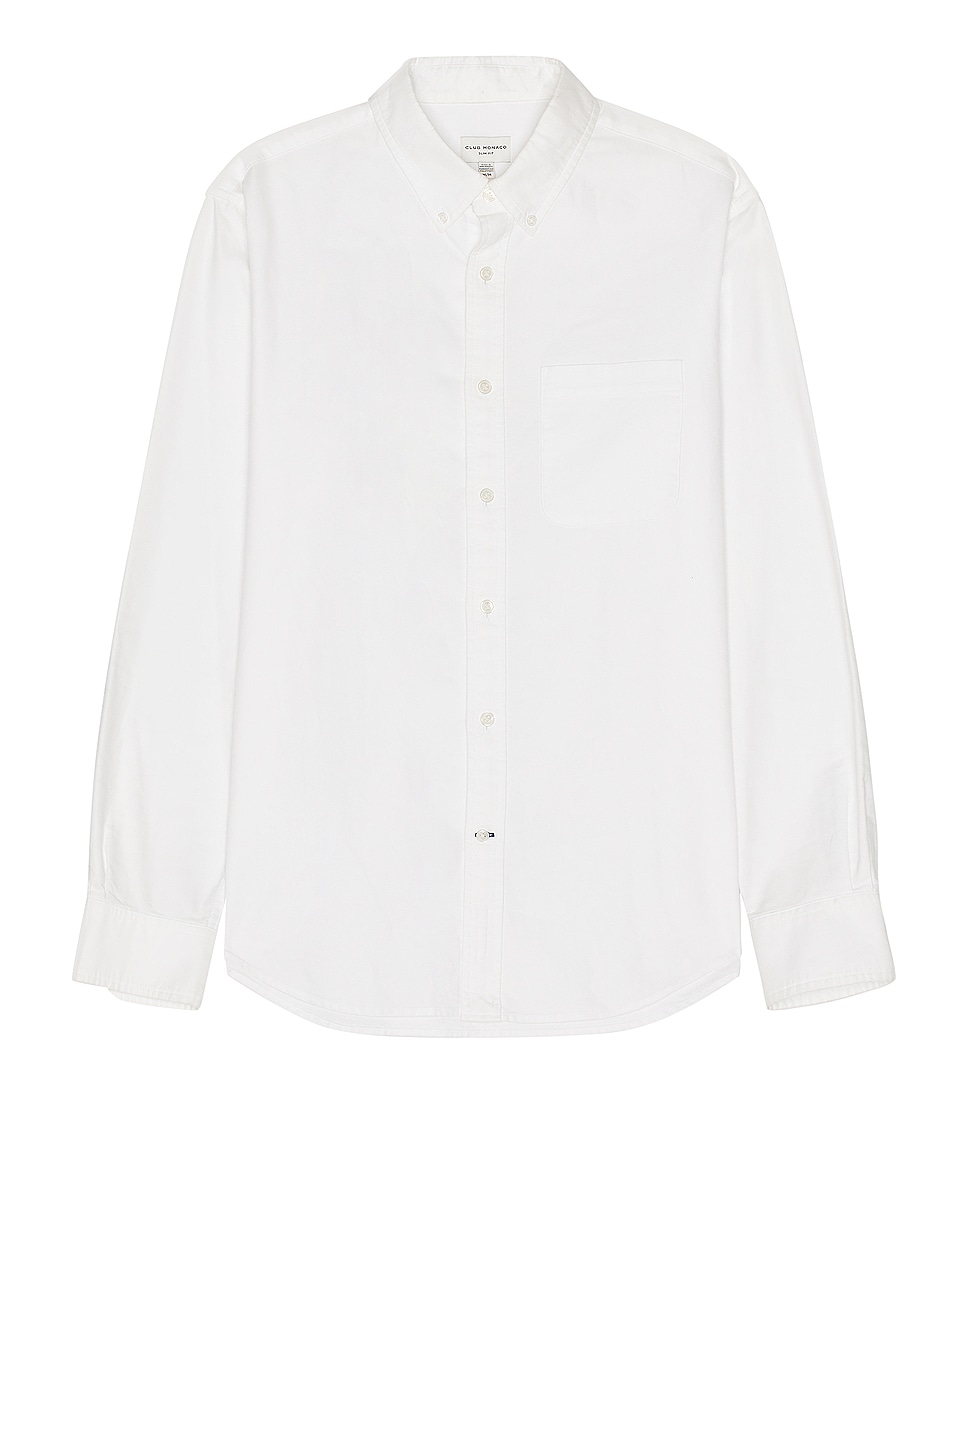 Image 1 of Club Monaco Oxford Solid Long Sleeve Shirt in White